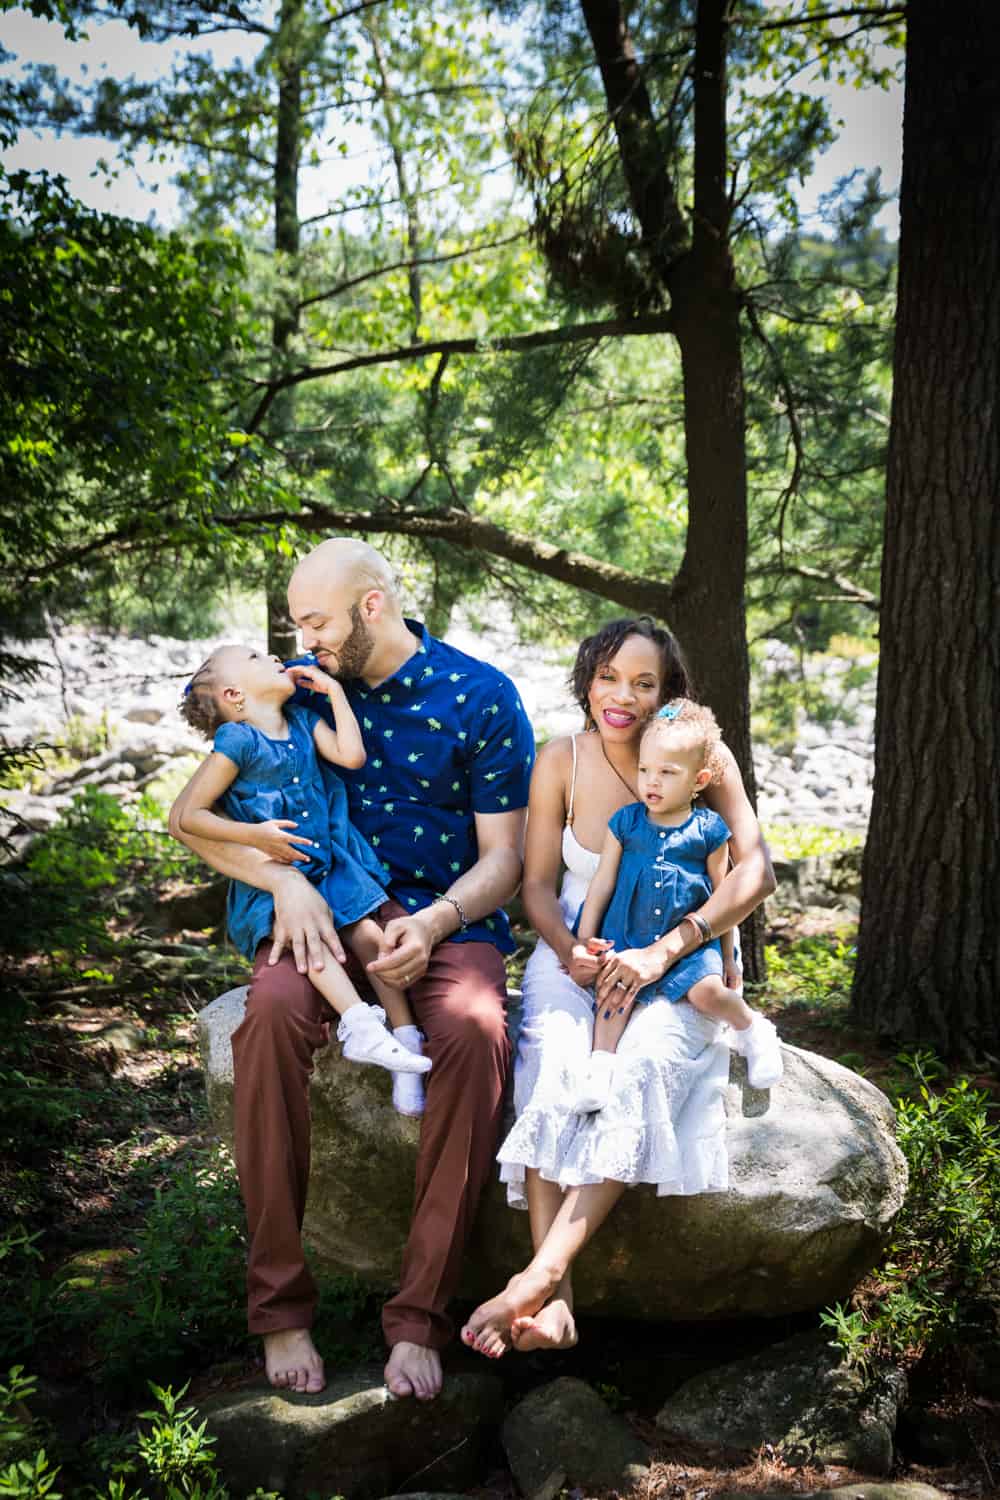 Parents attending to two children in the woods during a family reunion portrait